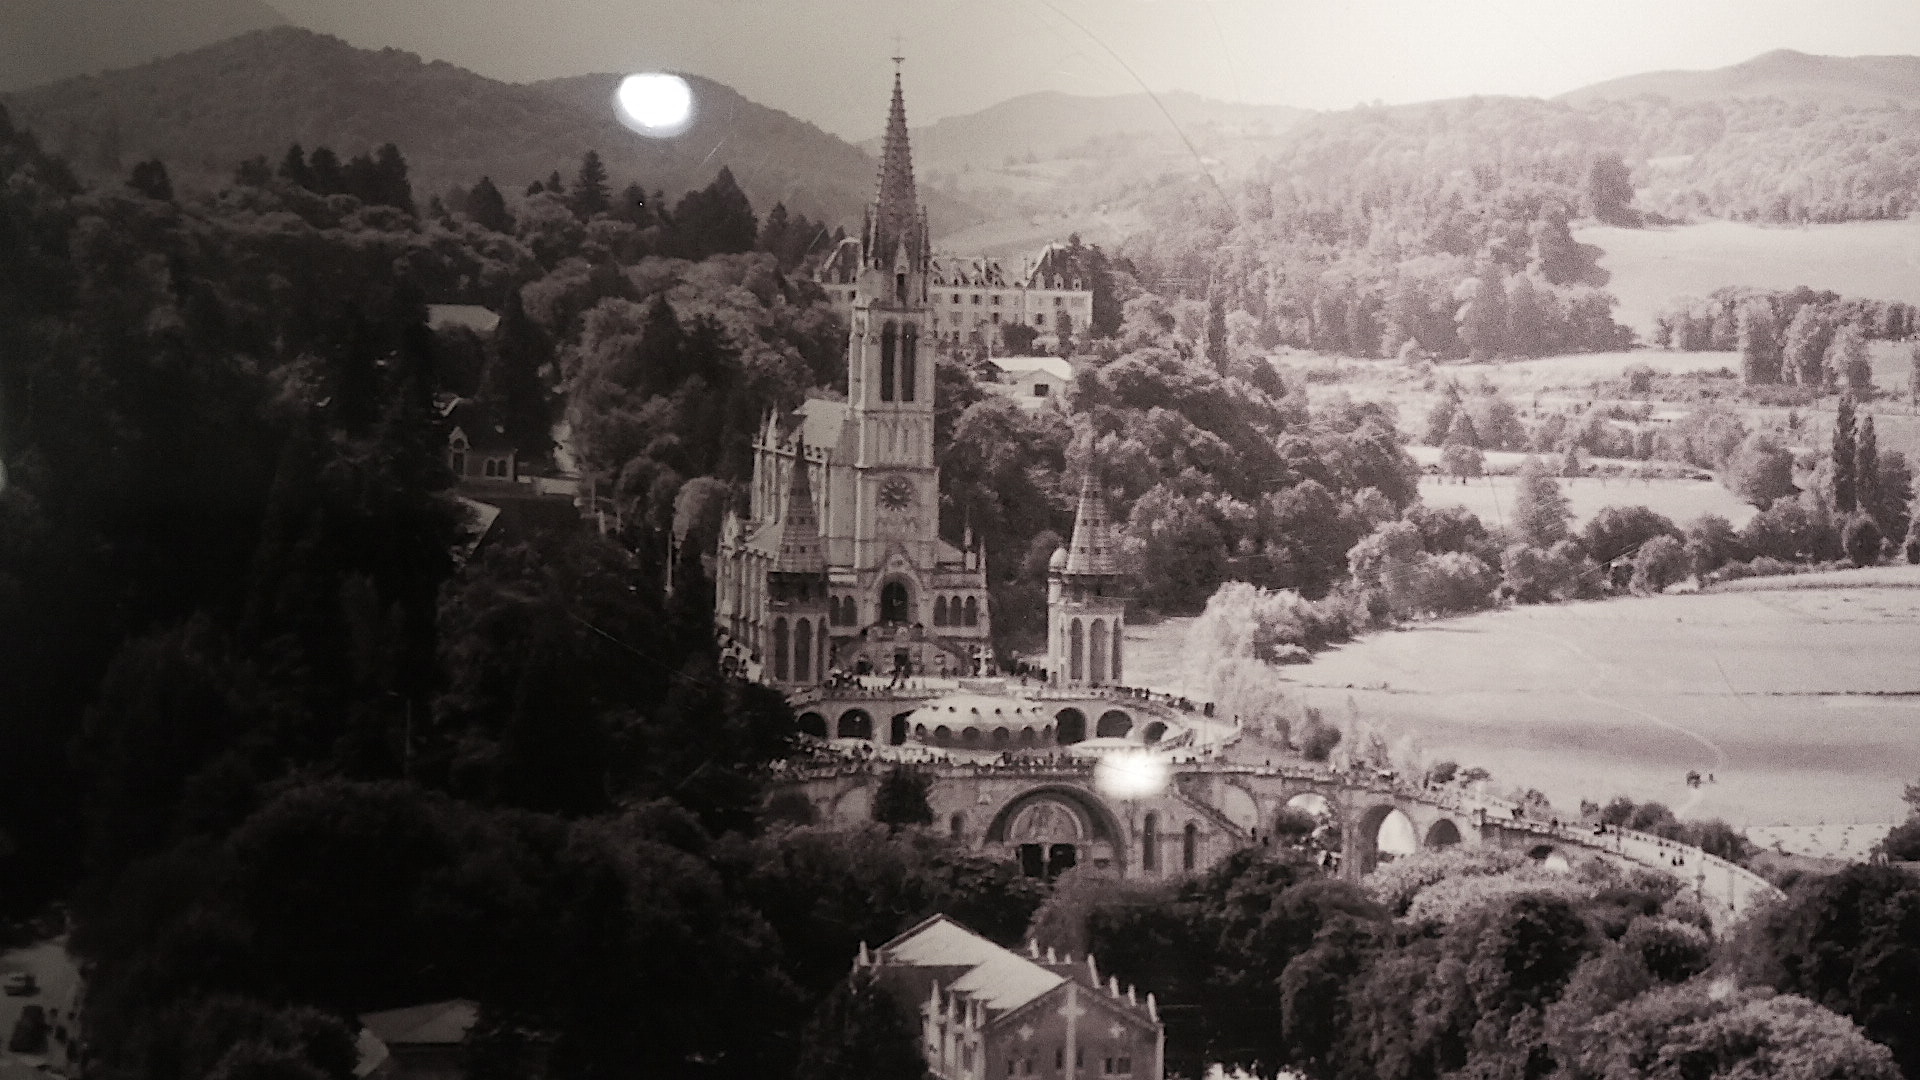 Early photo of Lourdes Sanctuary (may be as it looked during WW II to Franz Werfel)